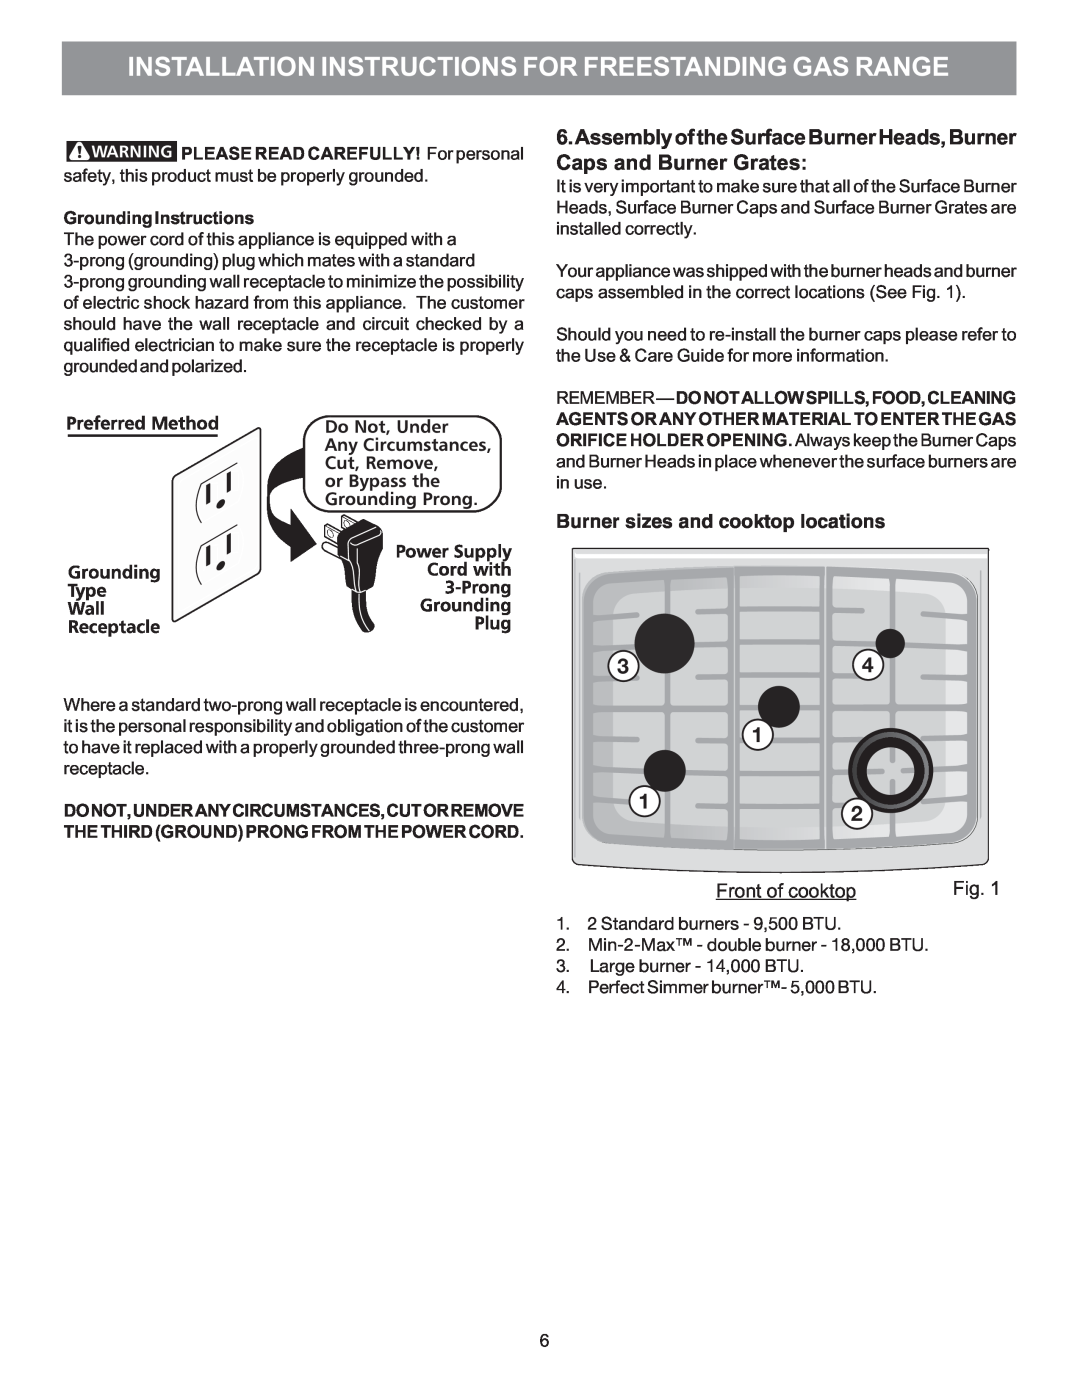 Electrolux 316469104 installation instructions Front of cooktop, Installation Instructions For Freestanding Gas Range 